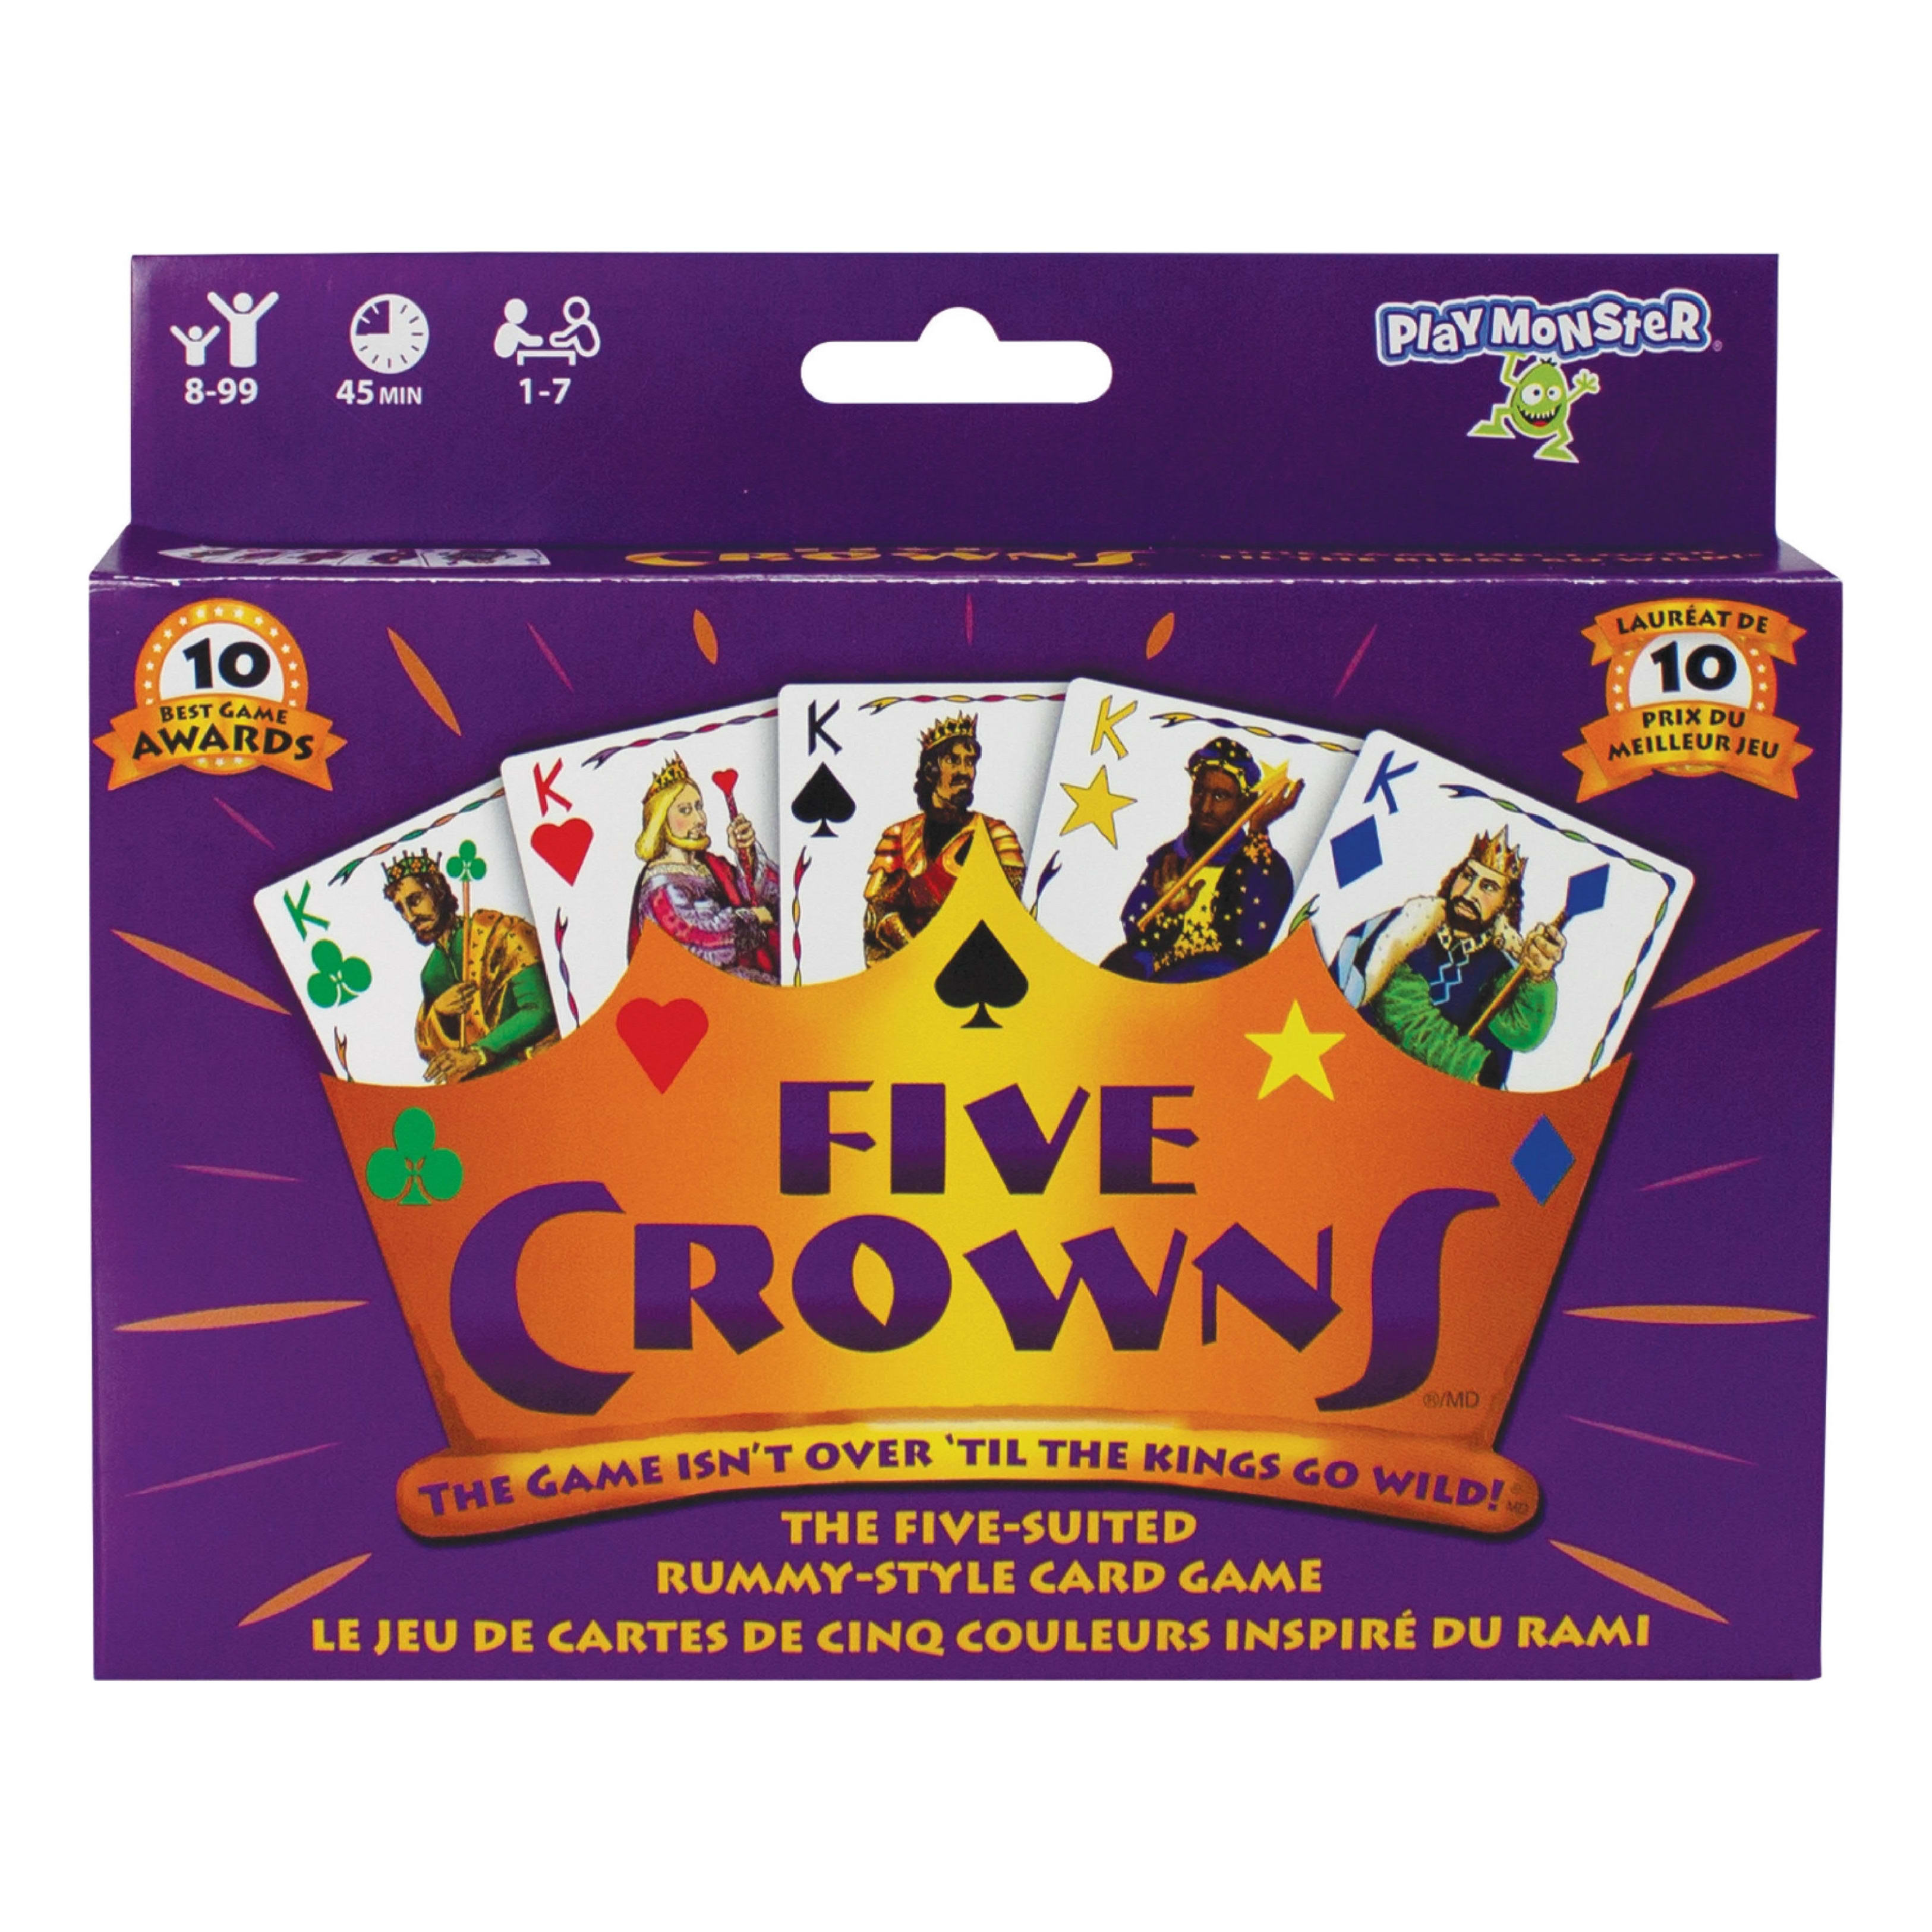 Playmonster Five Crowns Card Game